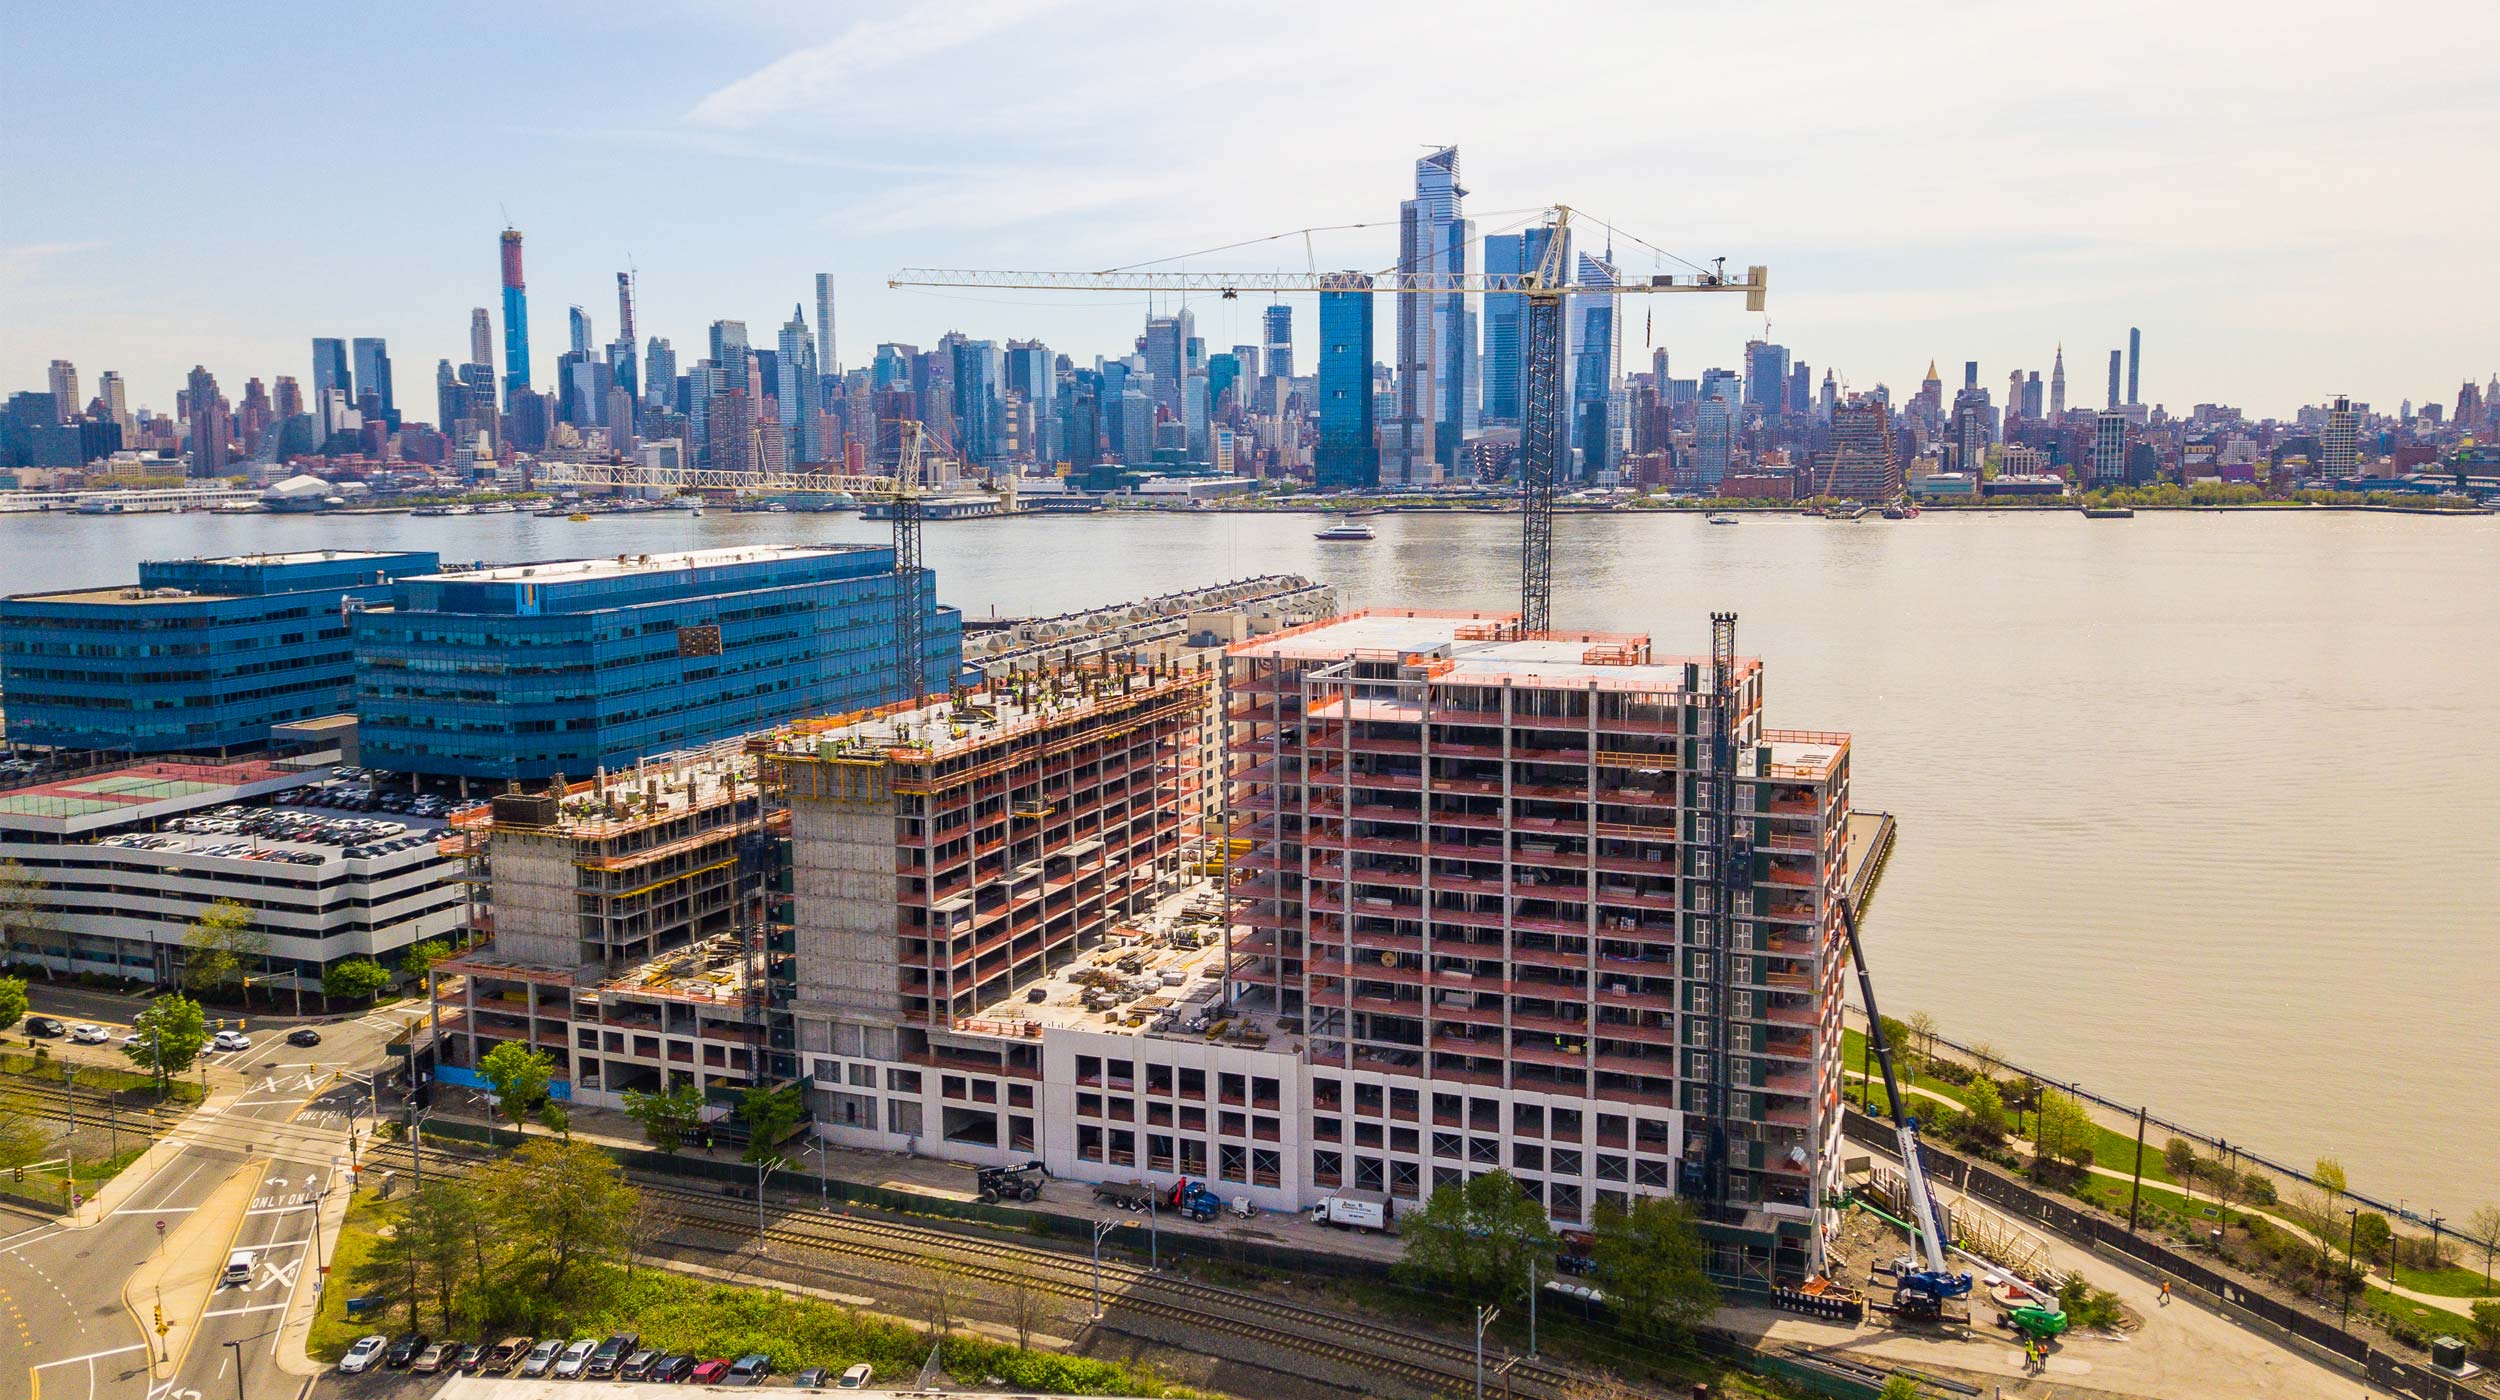 This building project of three towers of 15-stories will host 573 apartments and 719 parking spaces, covering a space of 275.108 m² that includes 15.850 m² of amenity space.